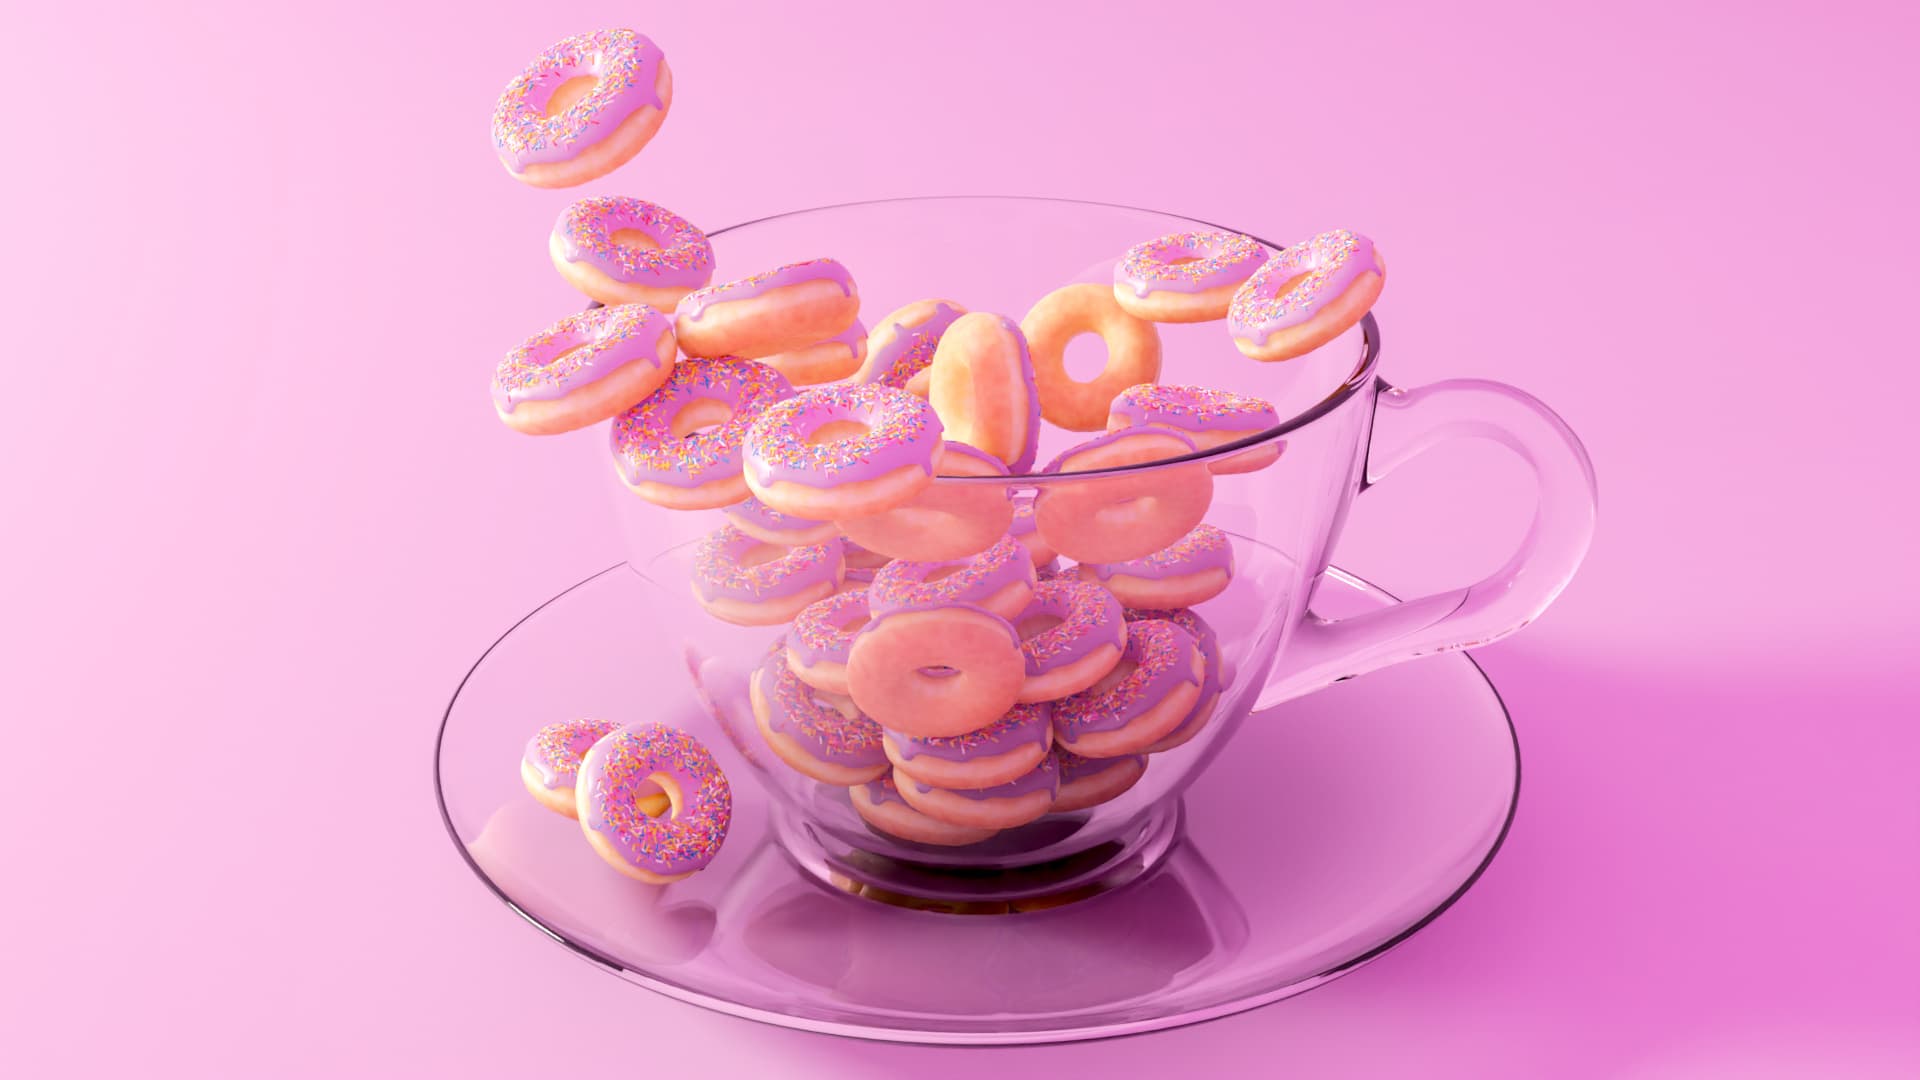 An image of a cup of glass with a lot of little donuts falling inside it.